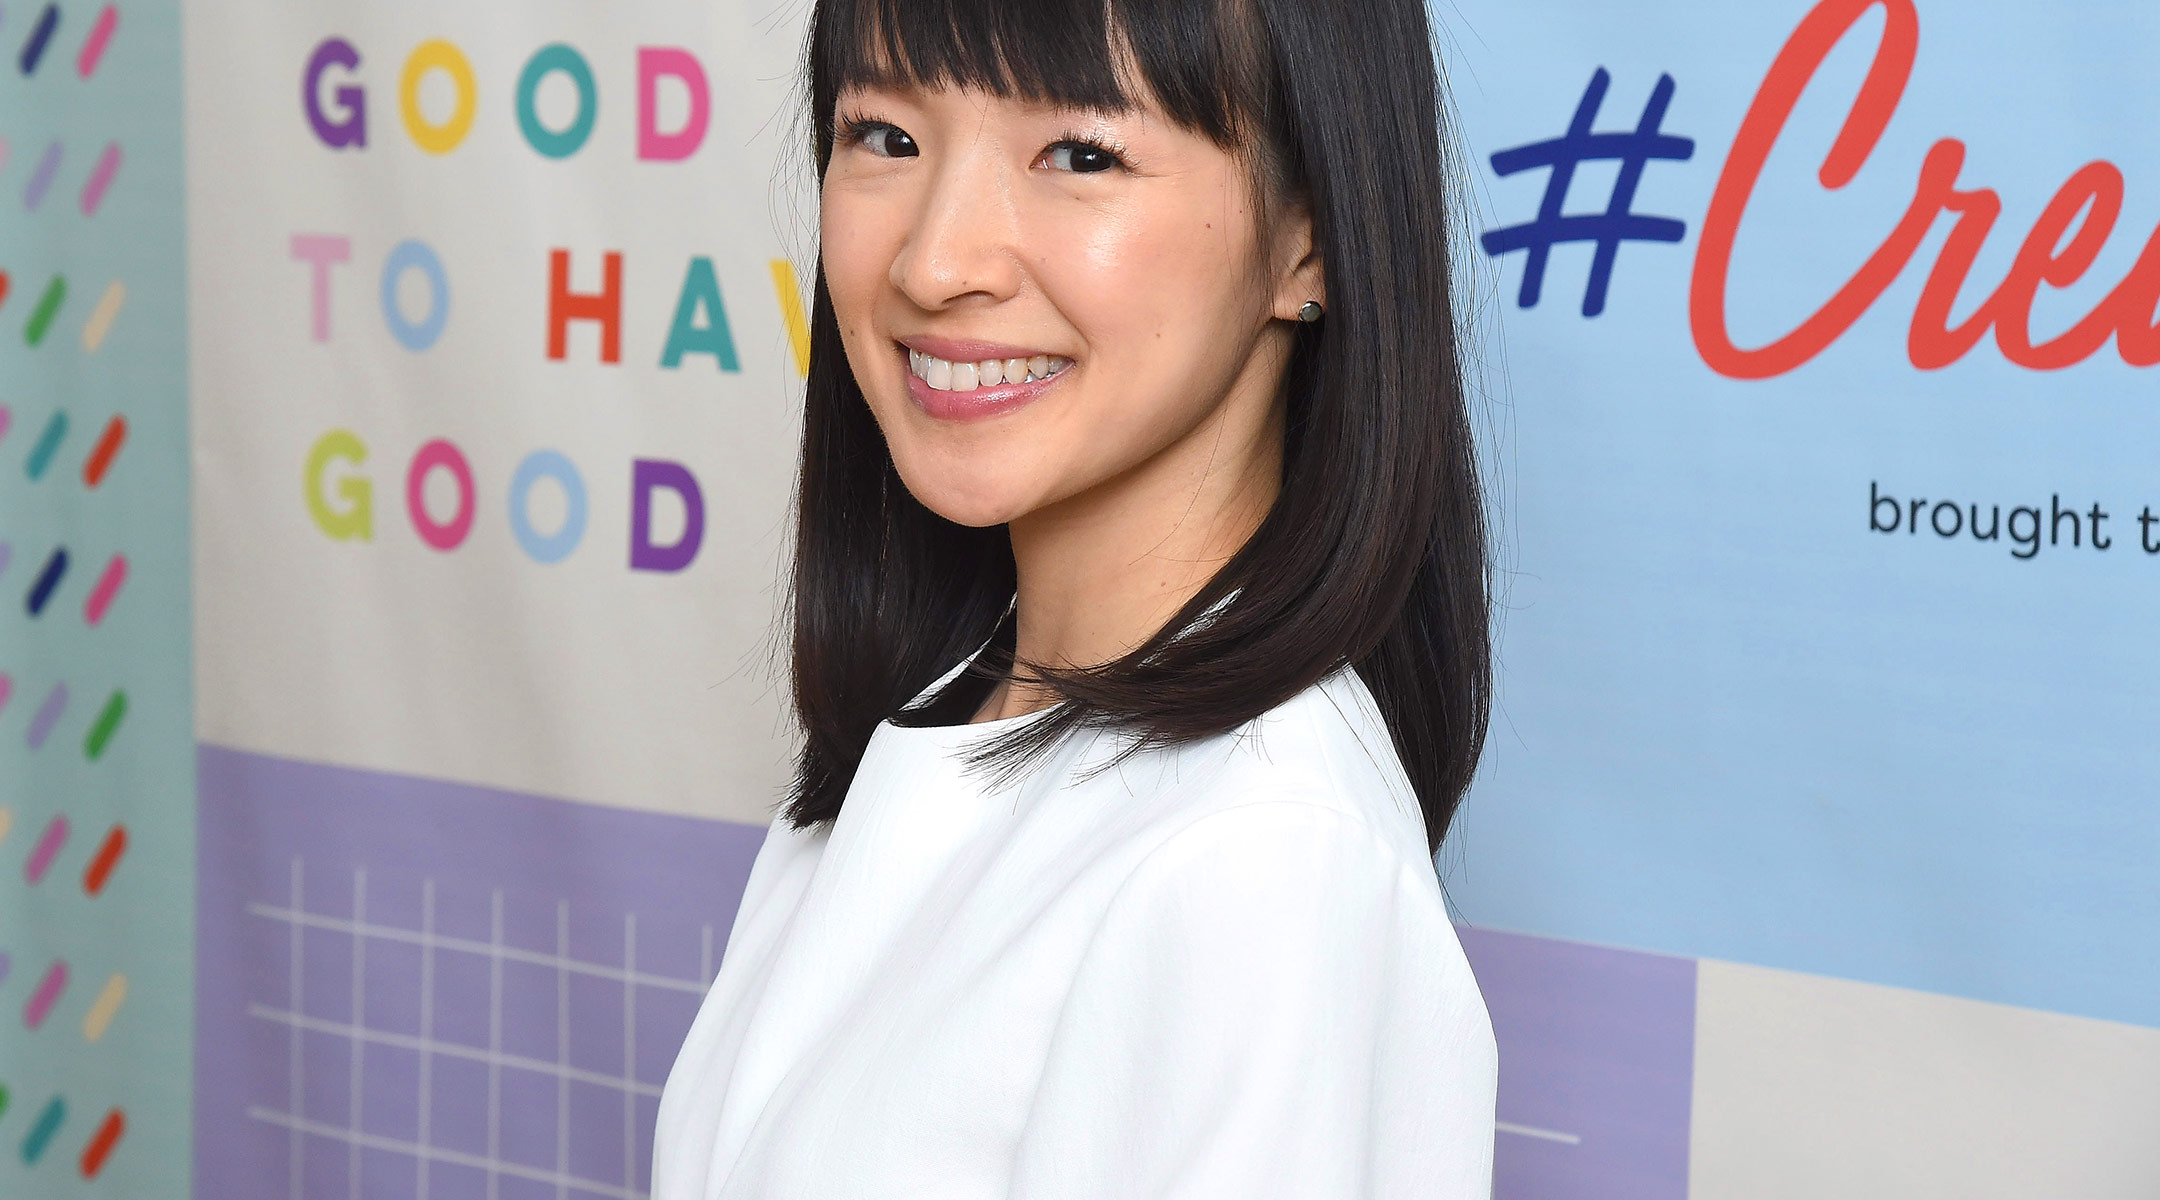 marie kondo has new show about tidying up on netflix